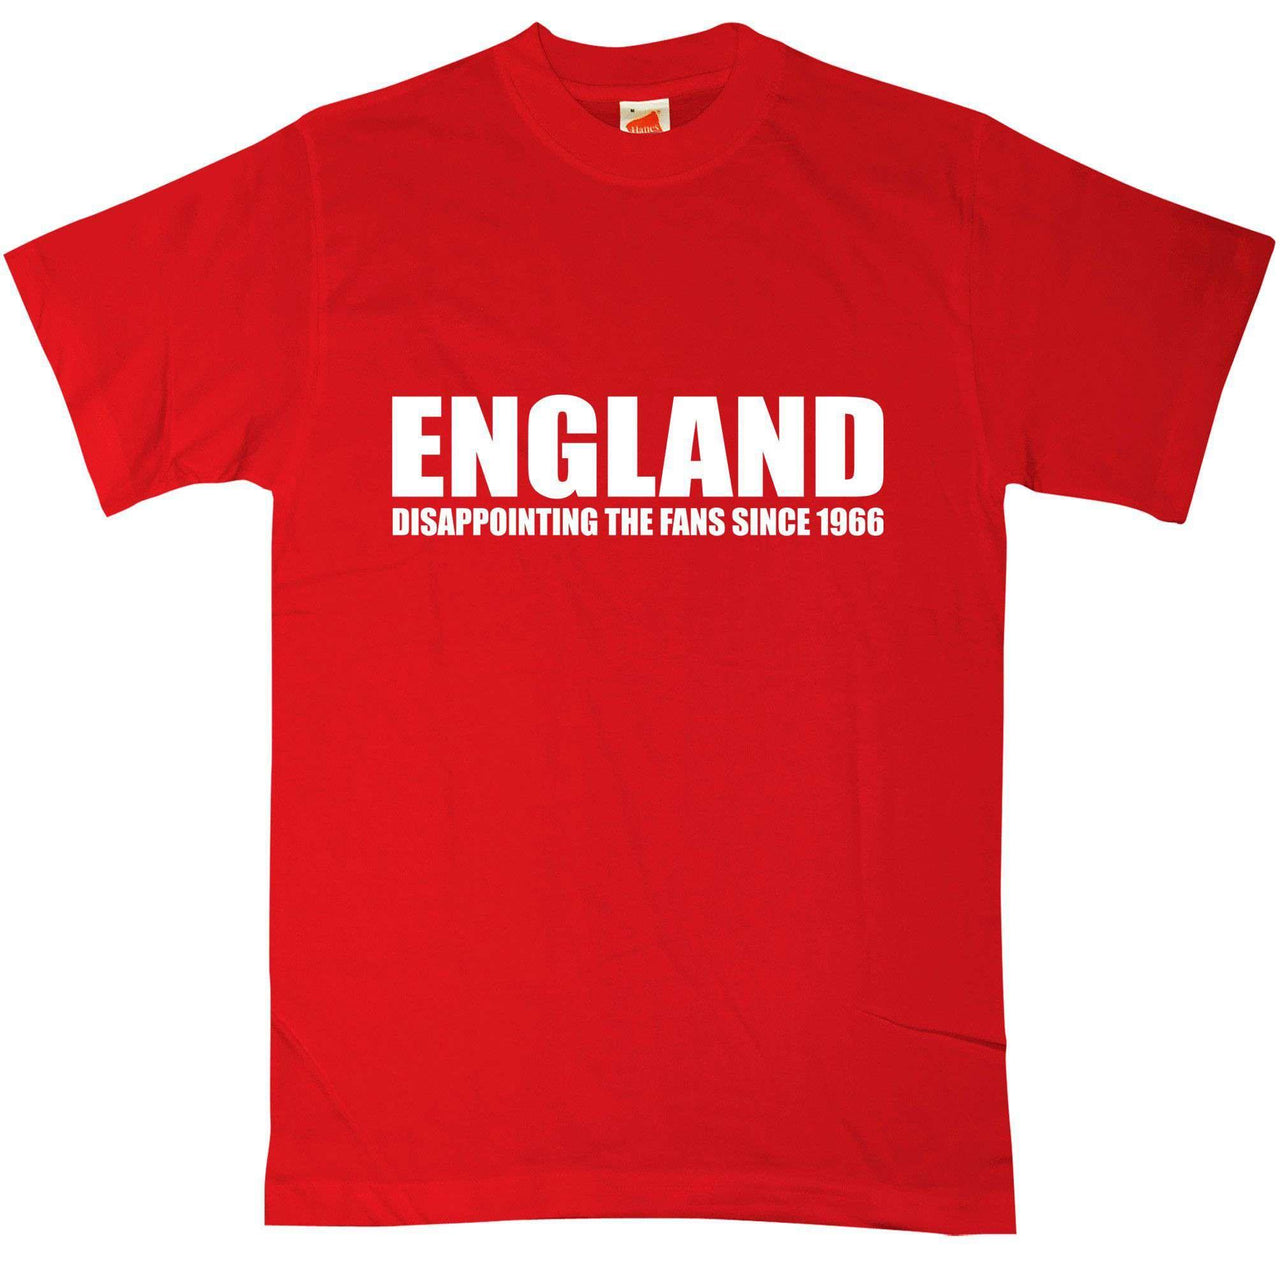 England Disappointing The Fans Since 66 Graphic T-Shirt For Men 8Ball